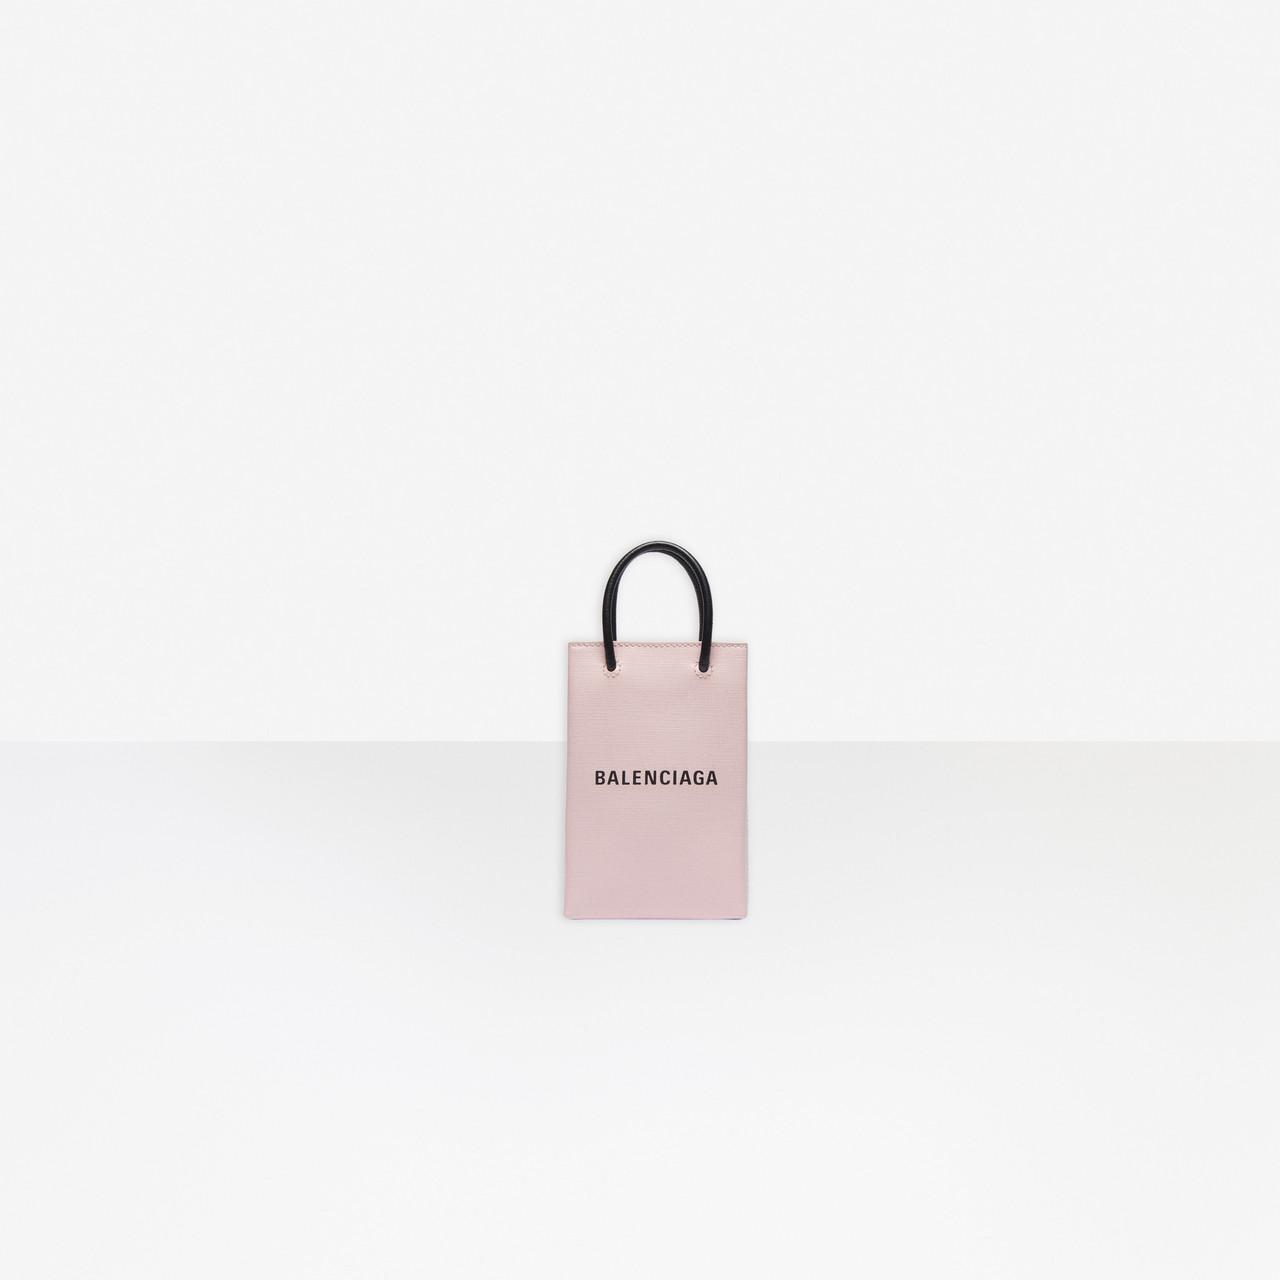 Balenciaga Leather Shopping Phone Holder in Light Rose (Pink) | Lyst